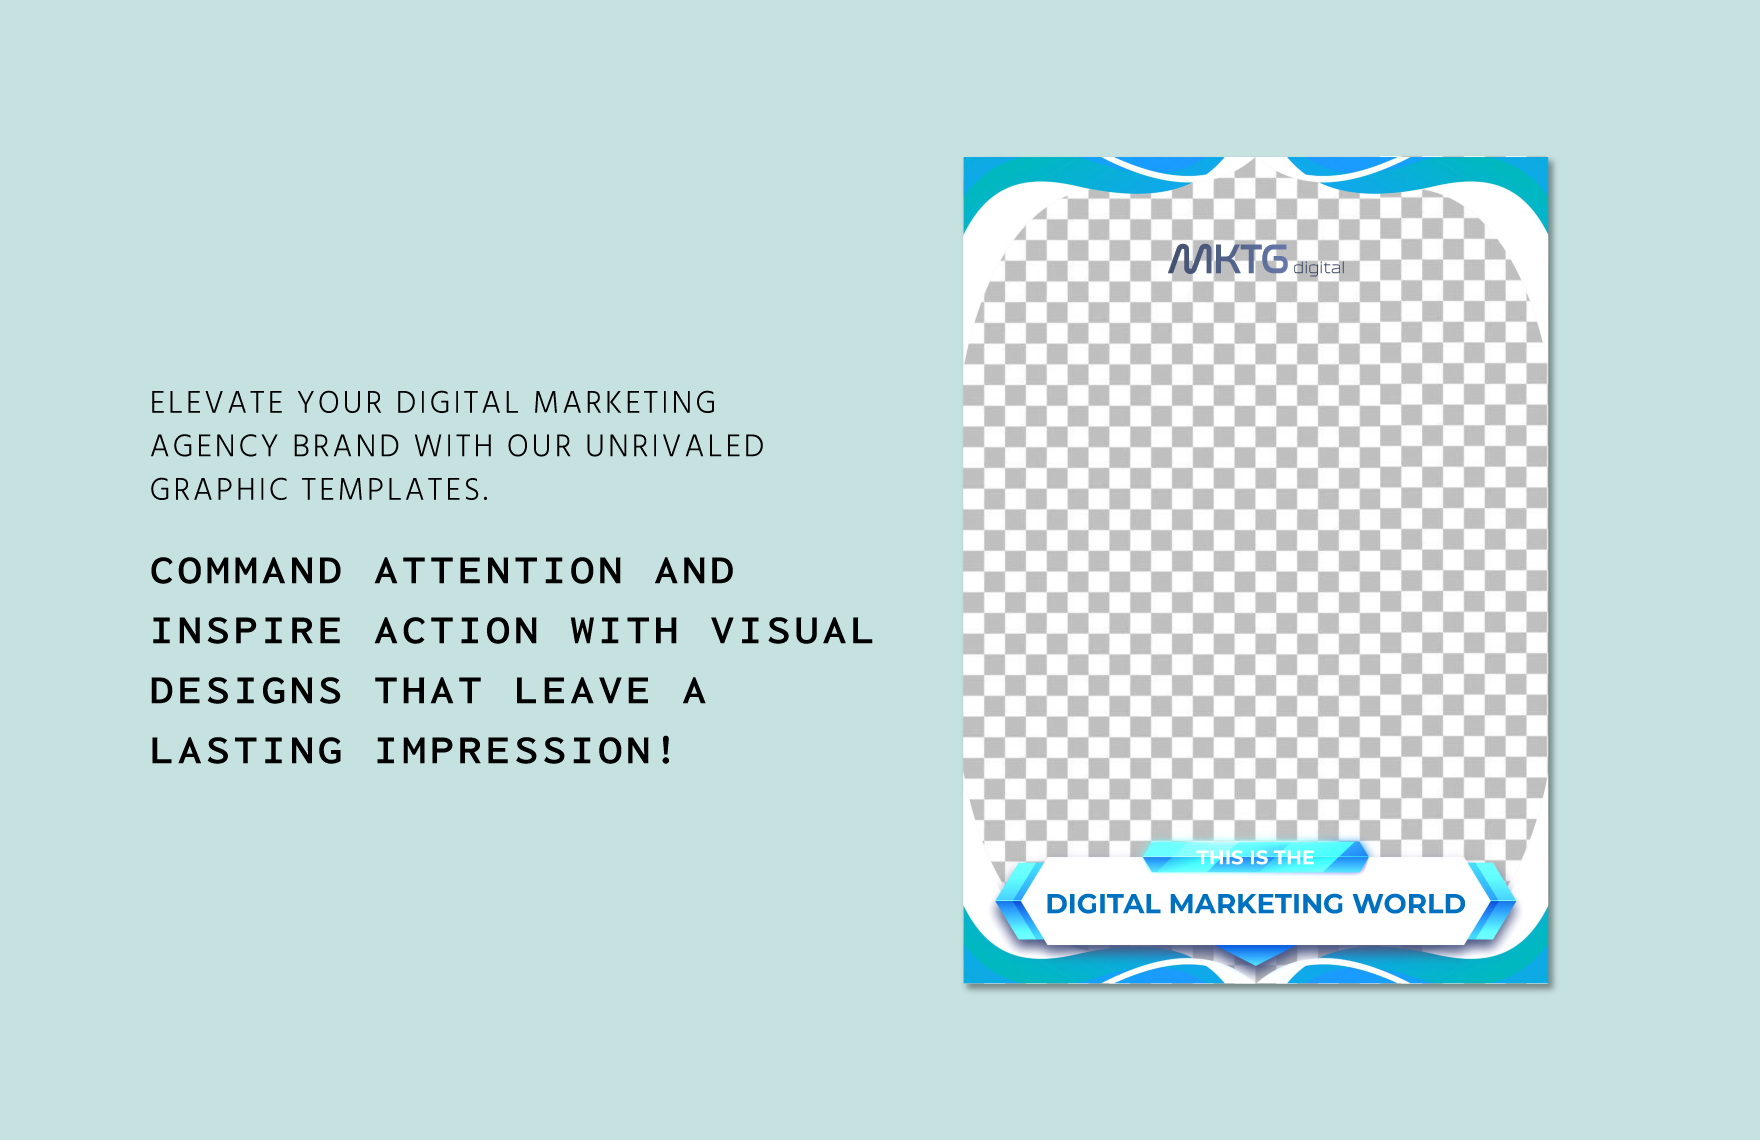 Digital Marketing Agency Product Image Frame Template